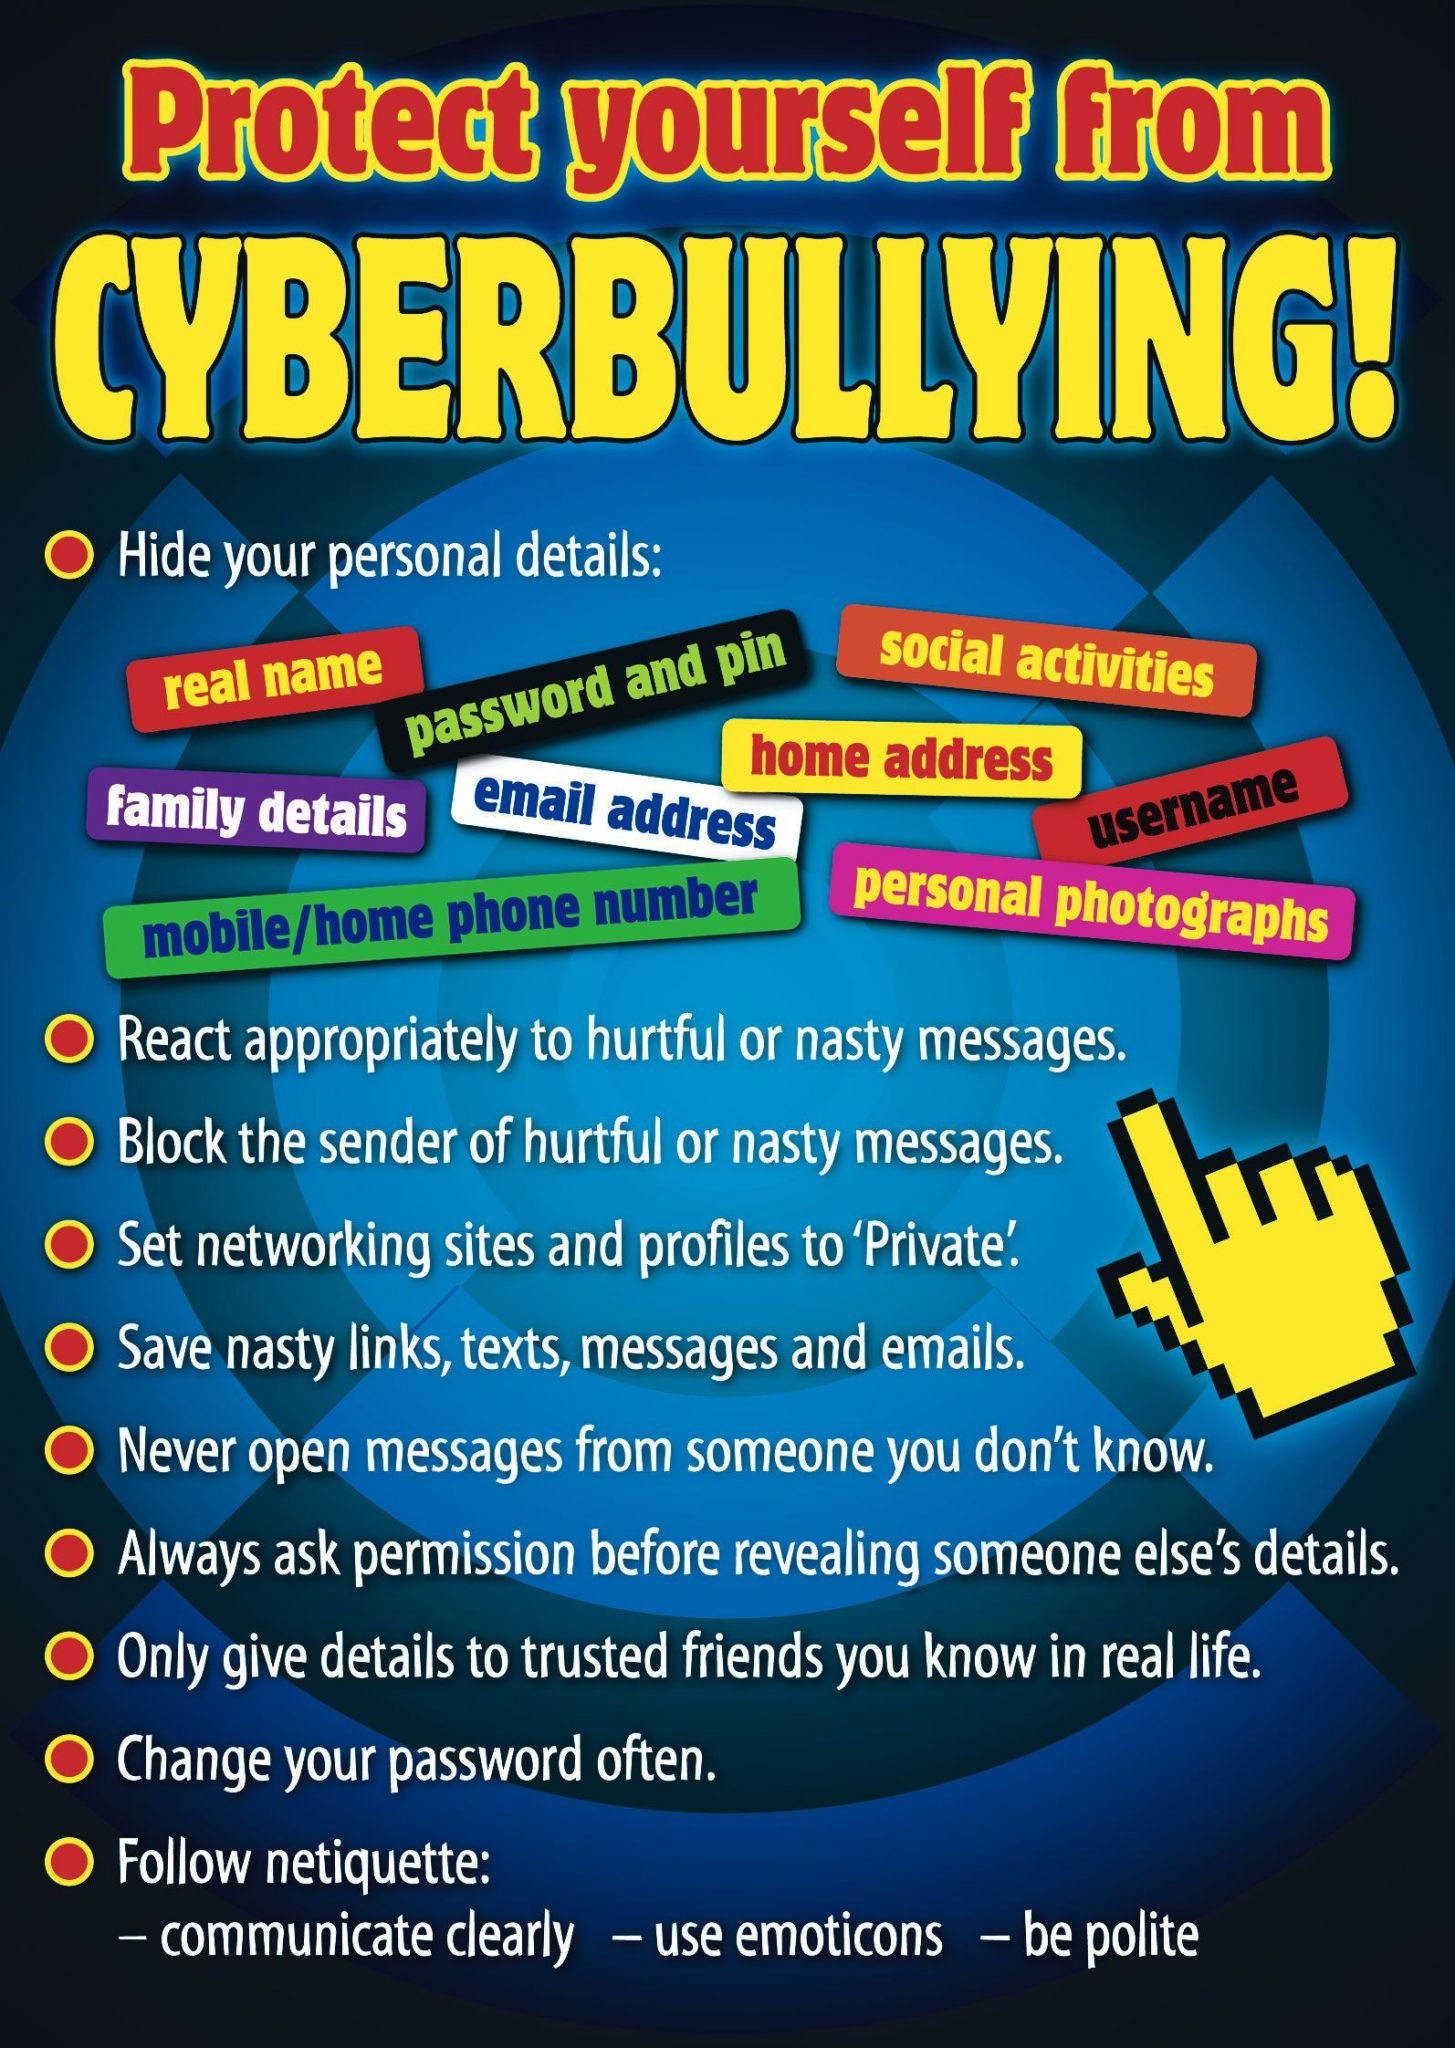 What is Cyberbullying? #infographic - Visualistan